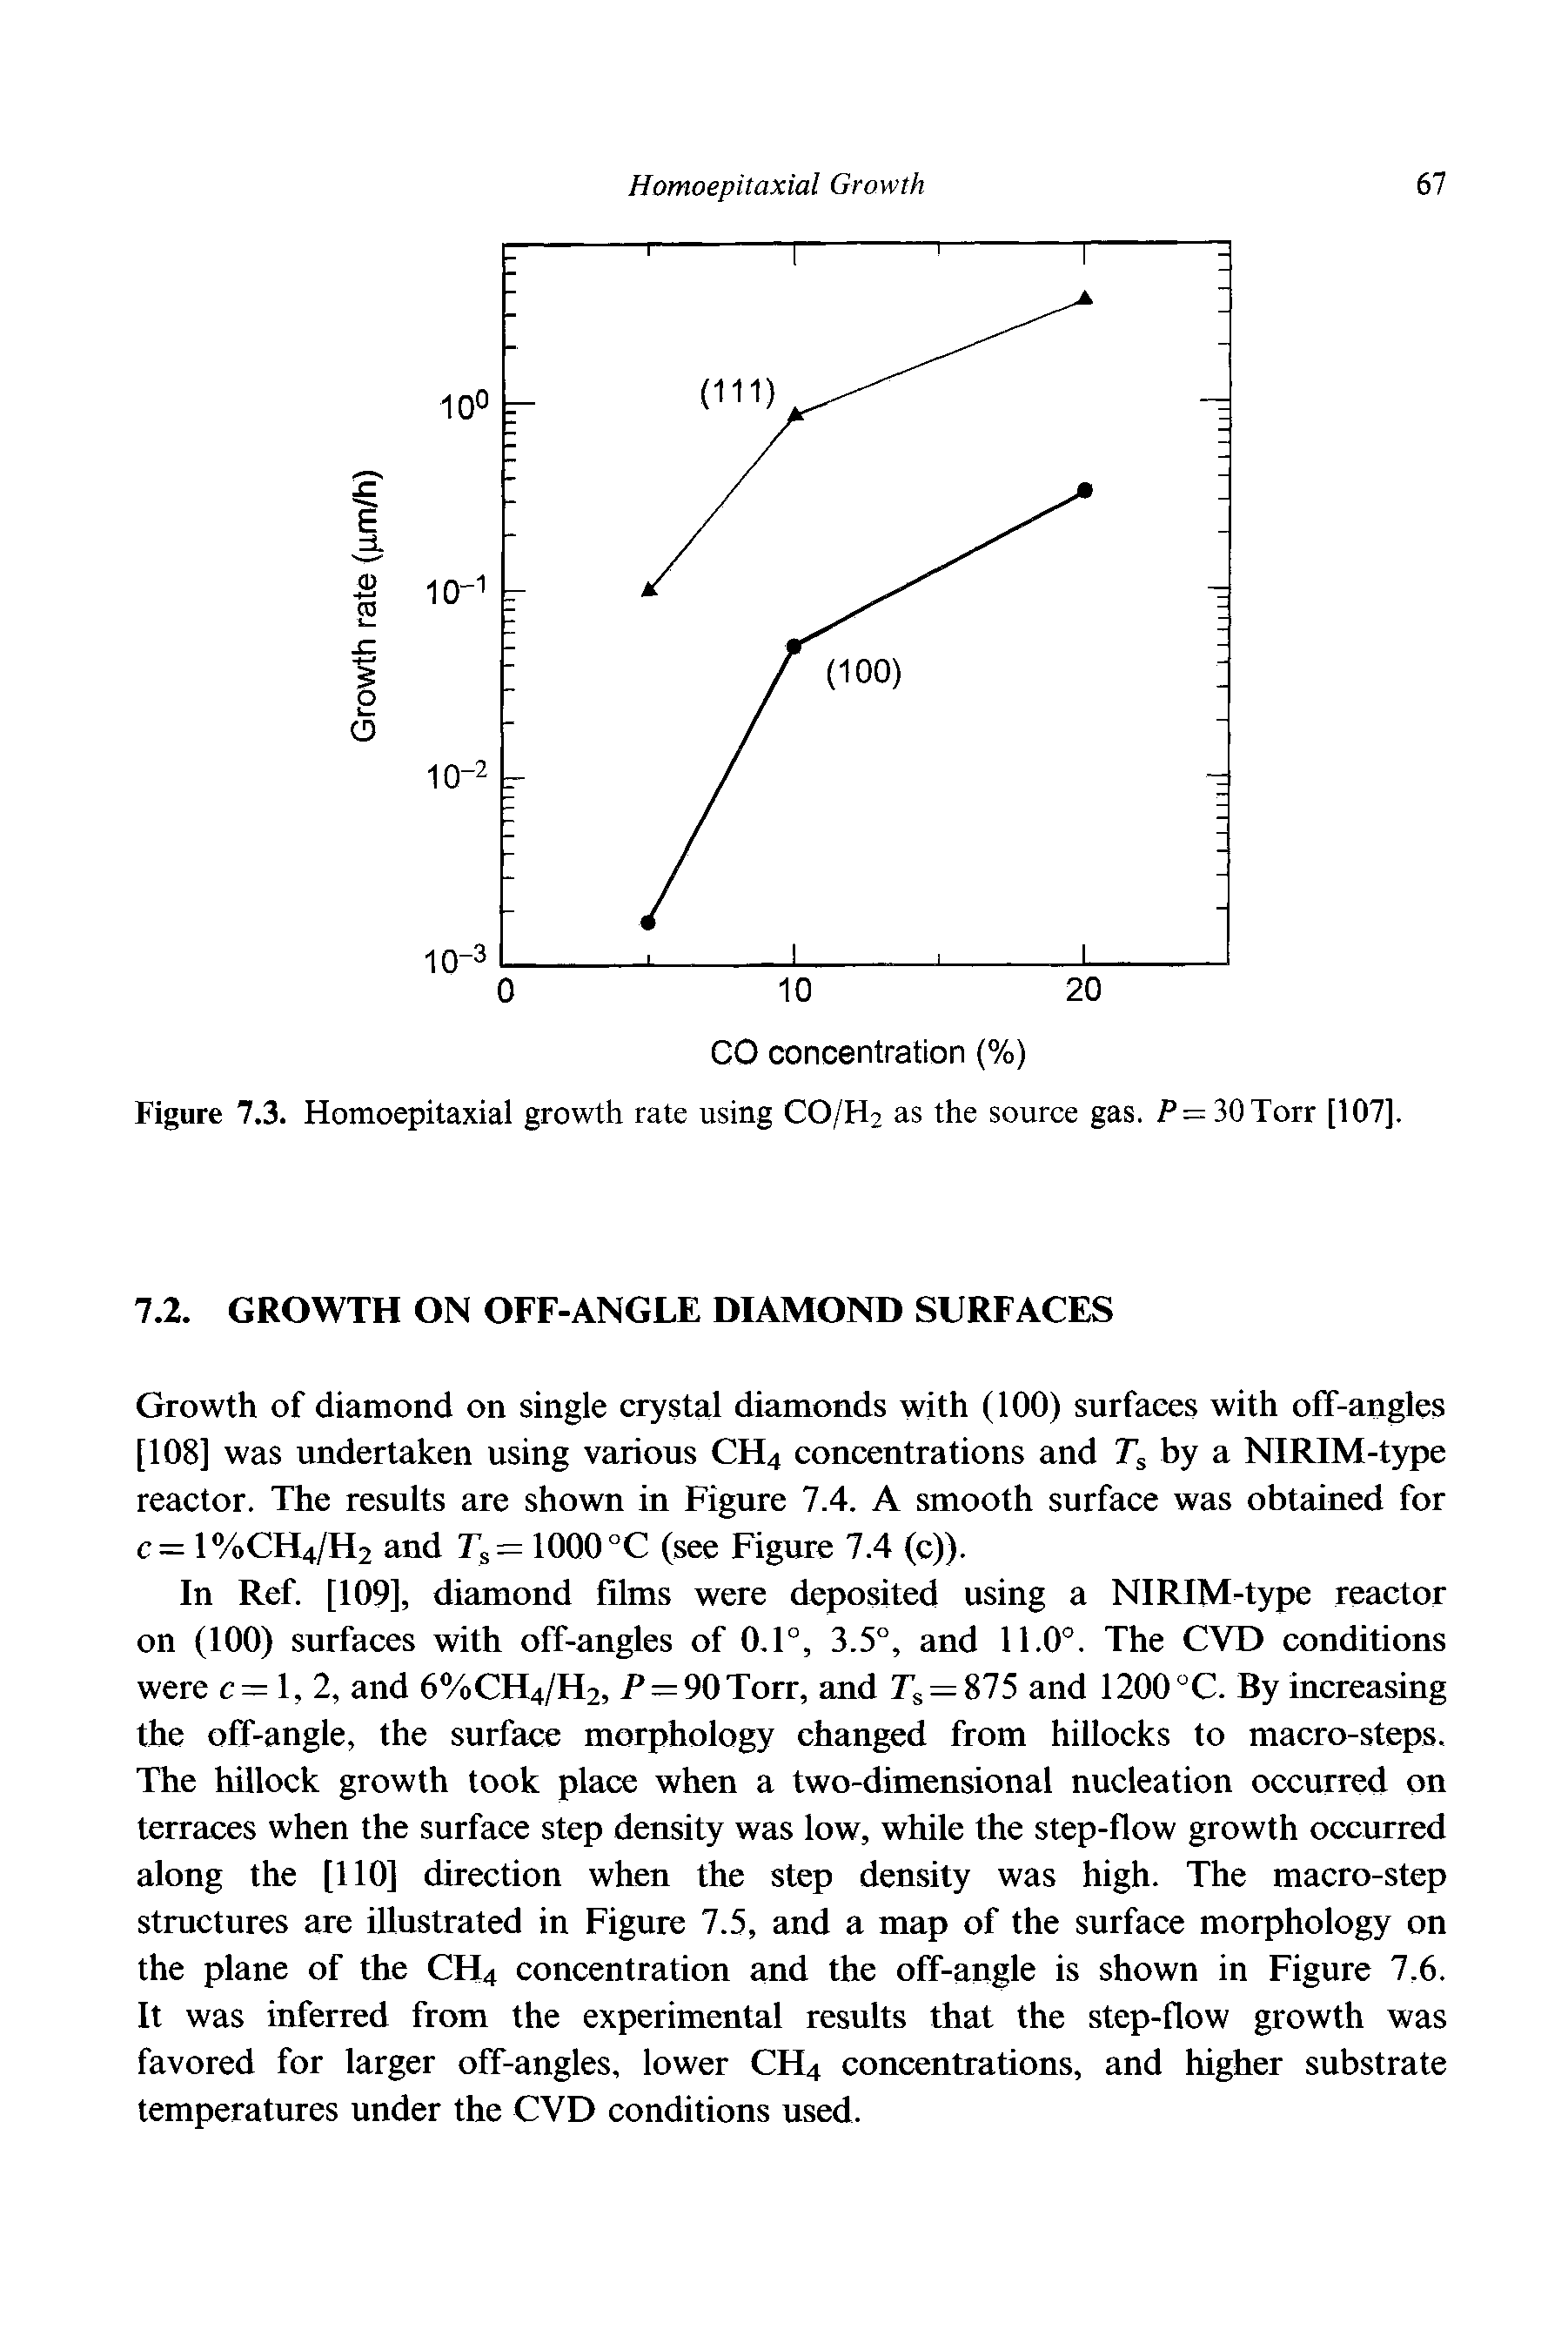 Figure 7.3. Homoepitaxial growth rate using CO/H2 as the source gas. P=30Torr [107].